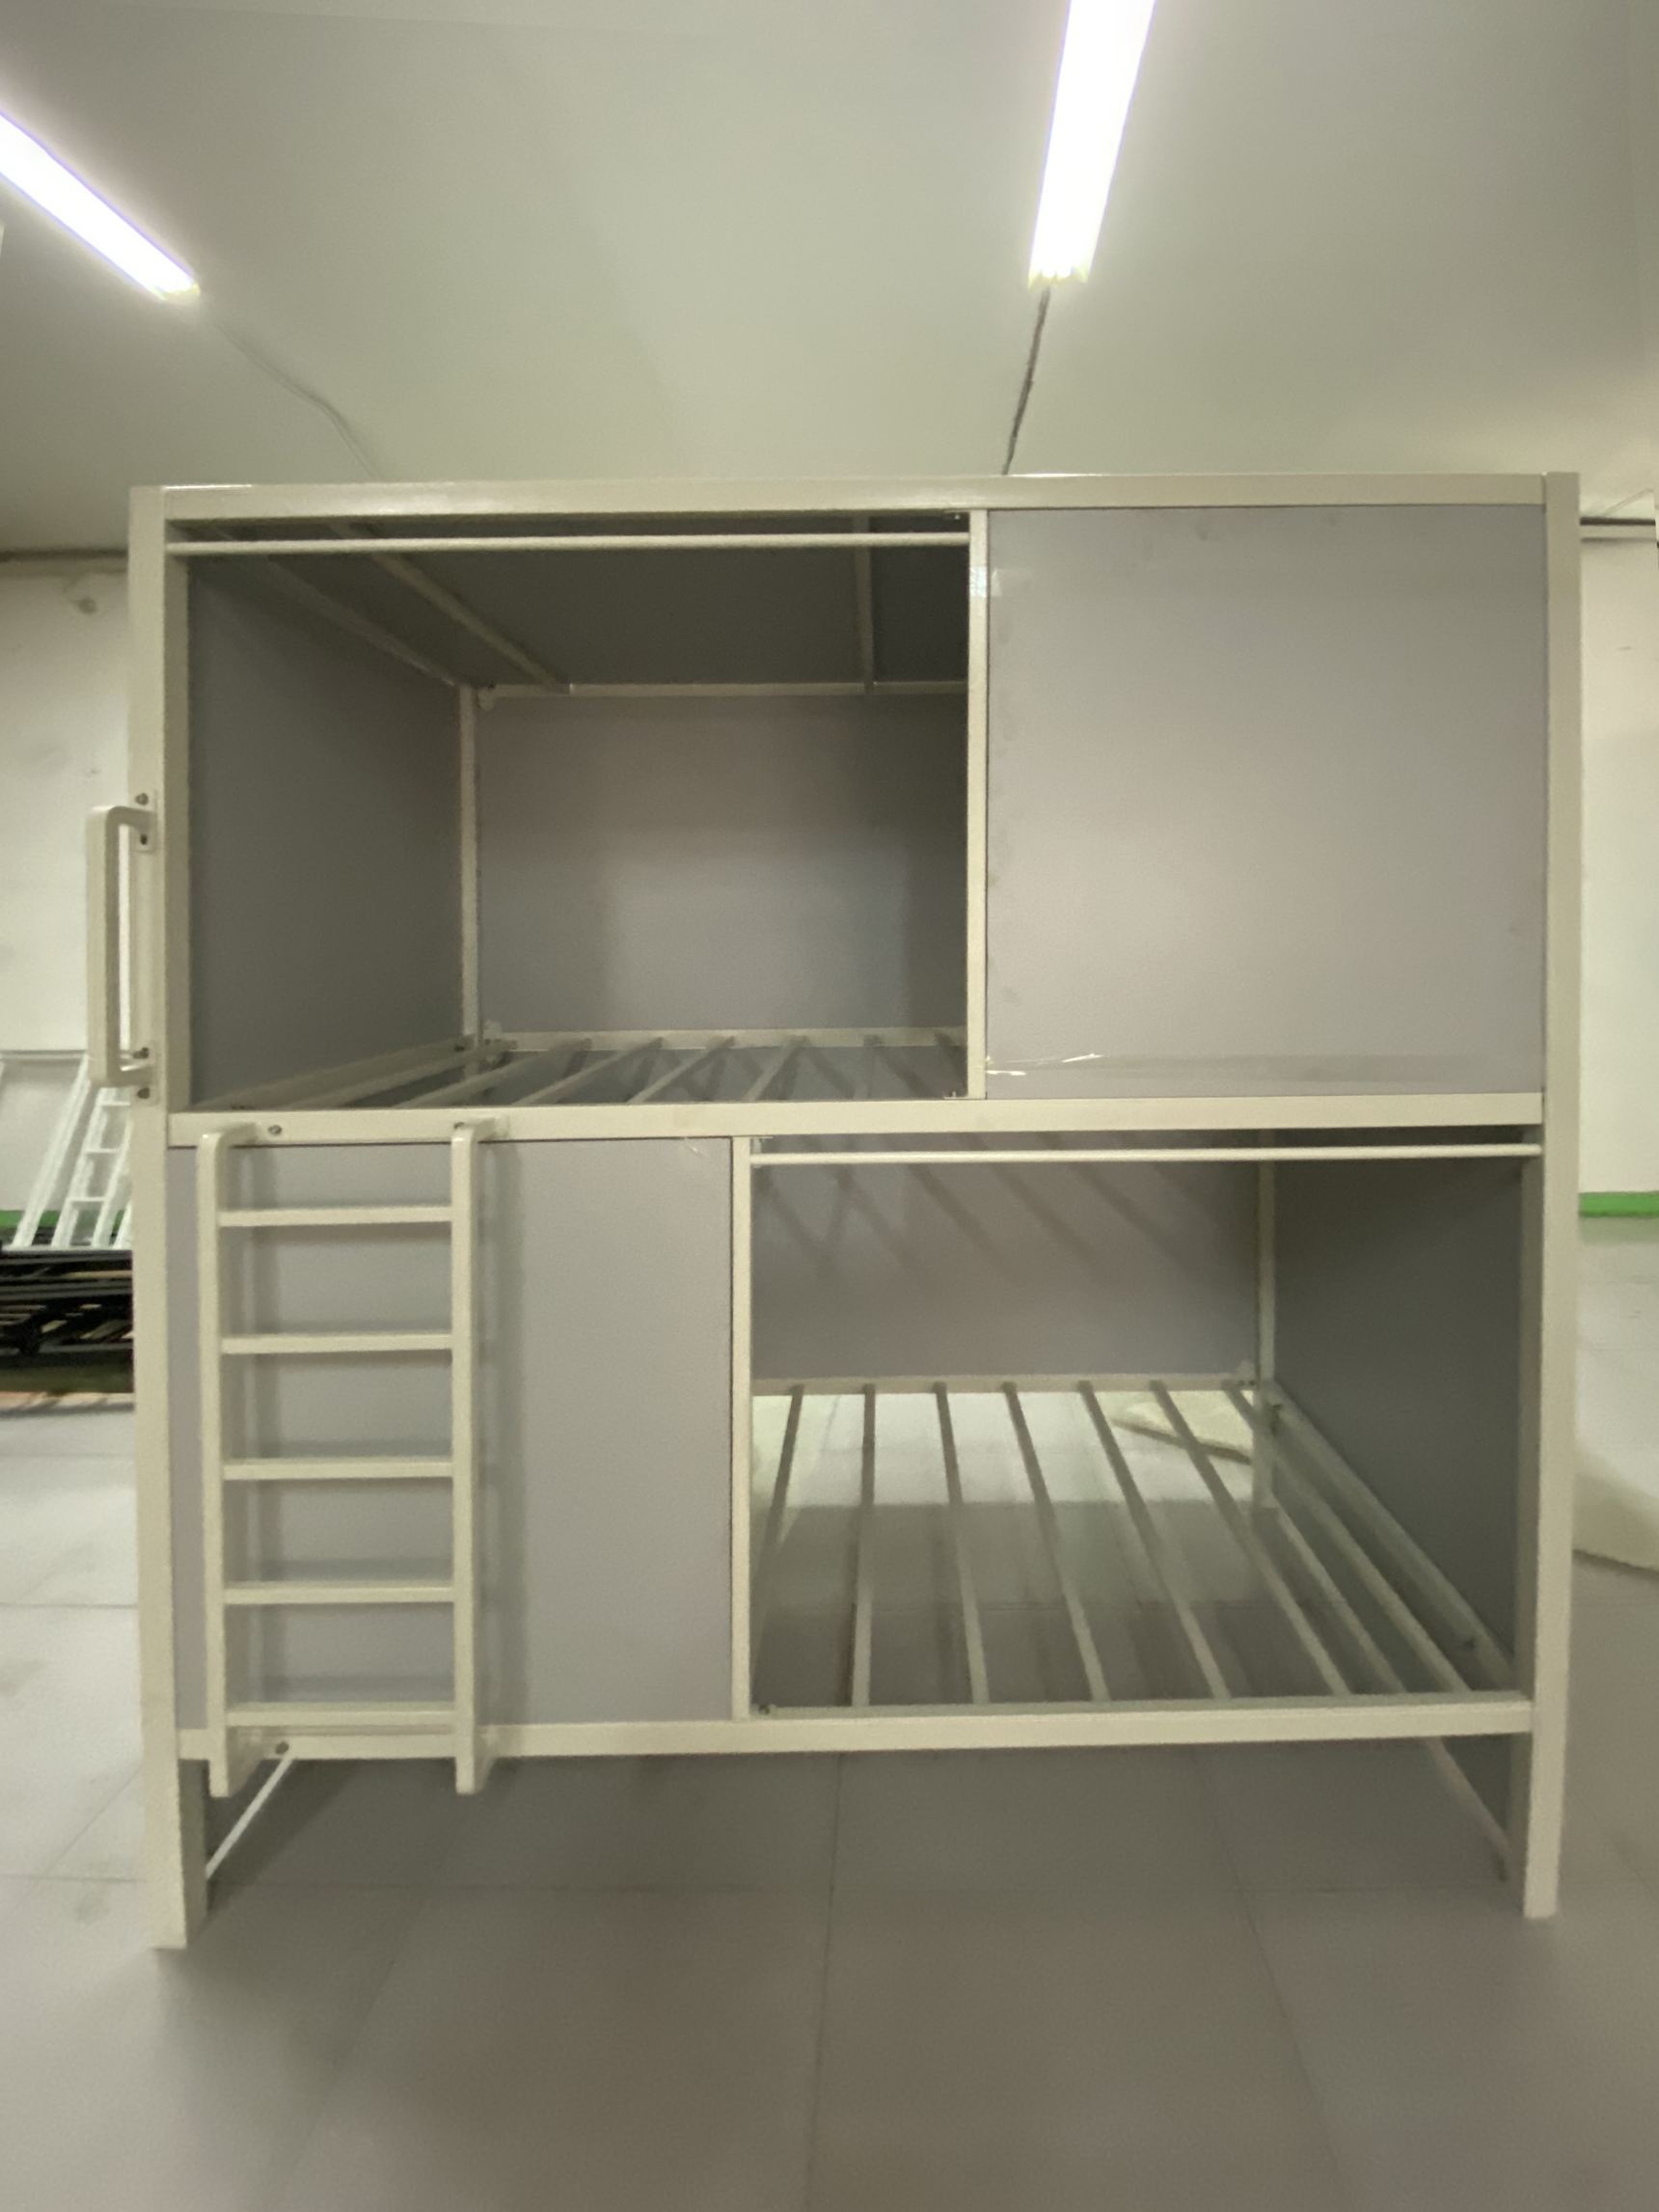 JZD 2019 Hot Sell! Strong Metal Twin Over Full Bunk Bed, Hostel Steel Bunk Bed Hostel Furniture Steel Hostel Beds